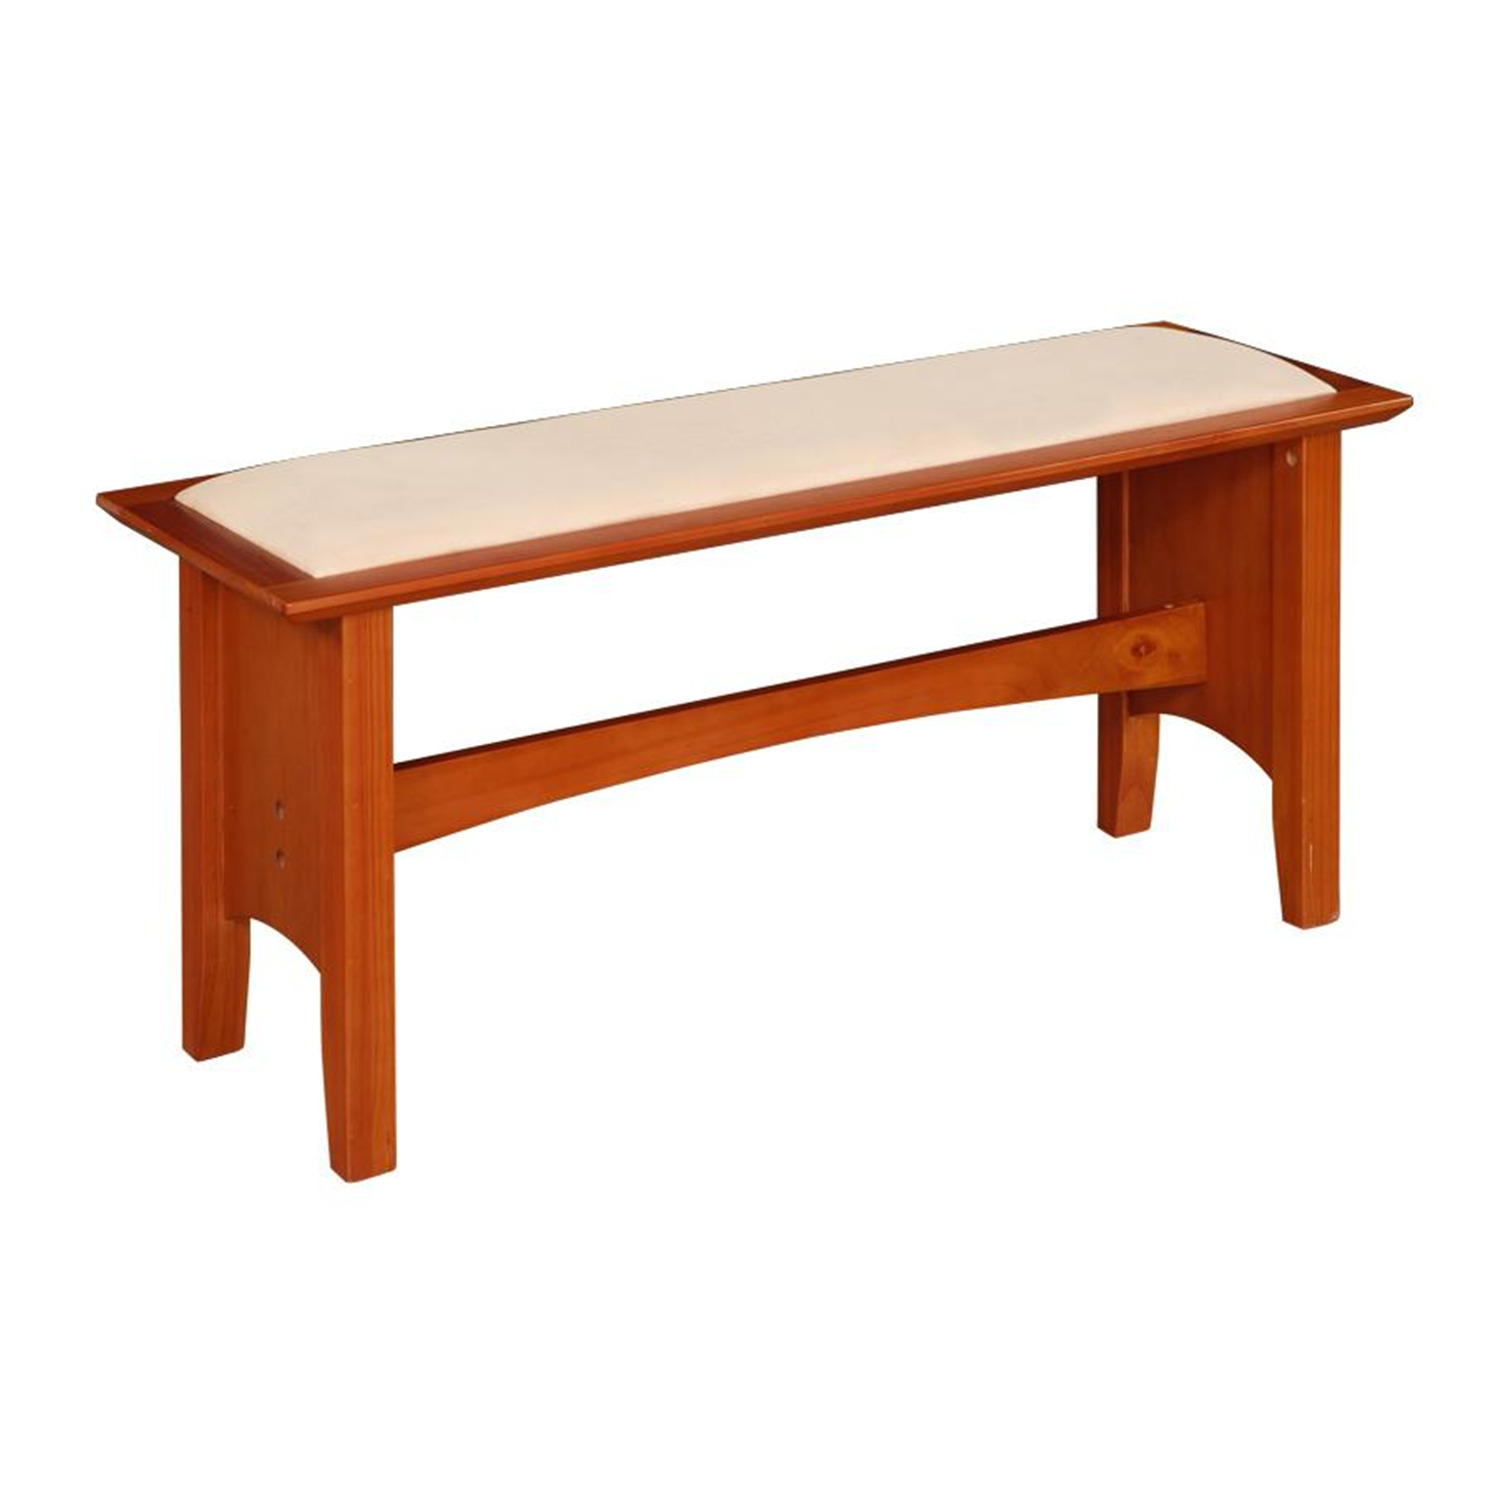 Linon Bench For Nook Set with Cherry Finish